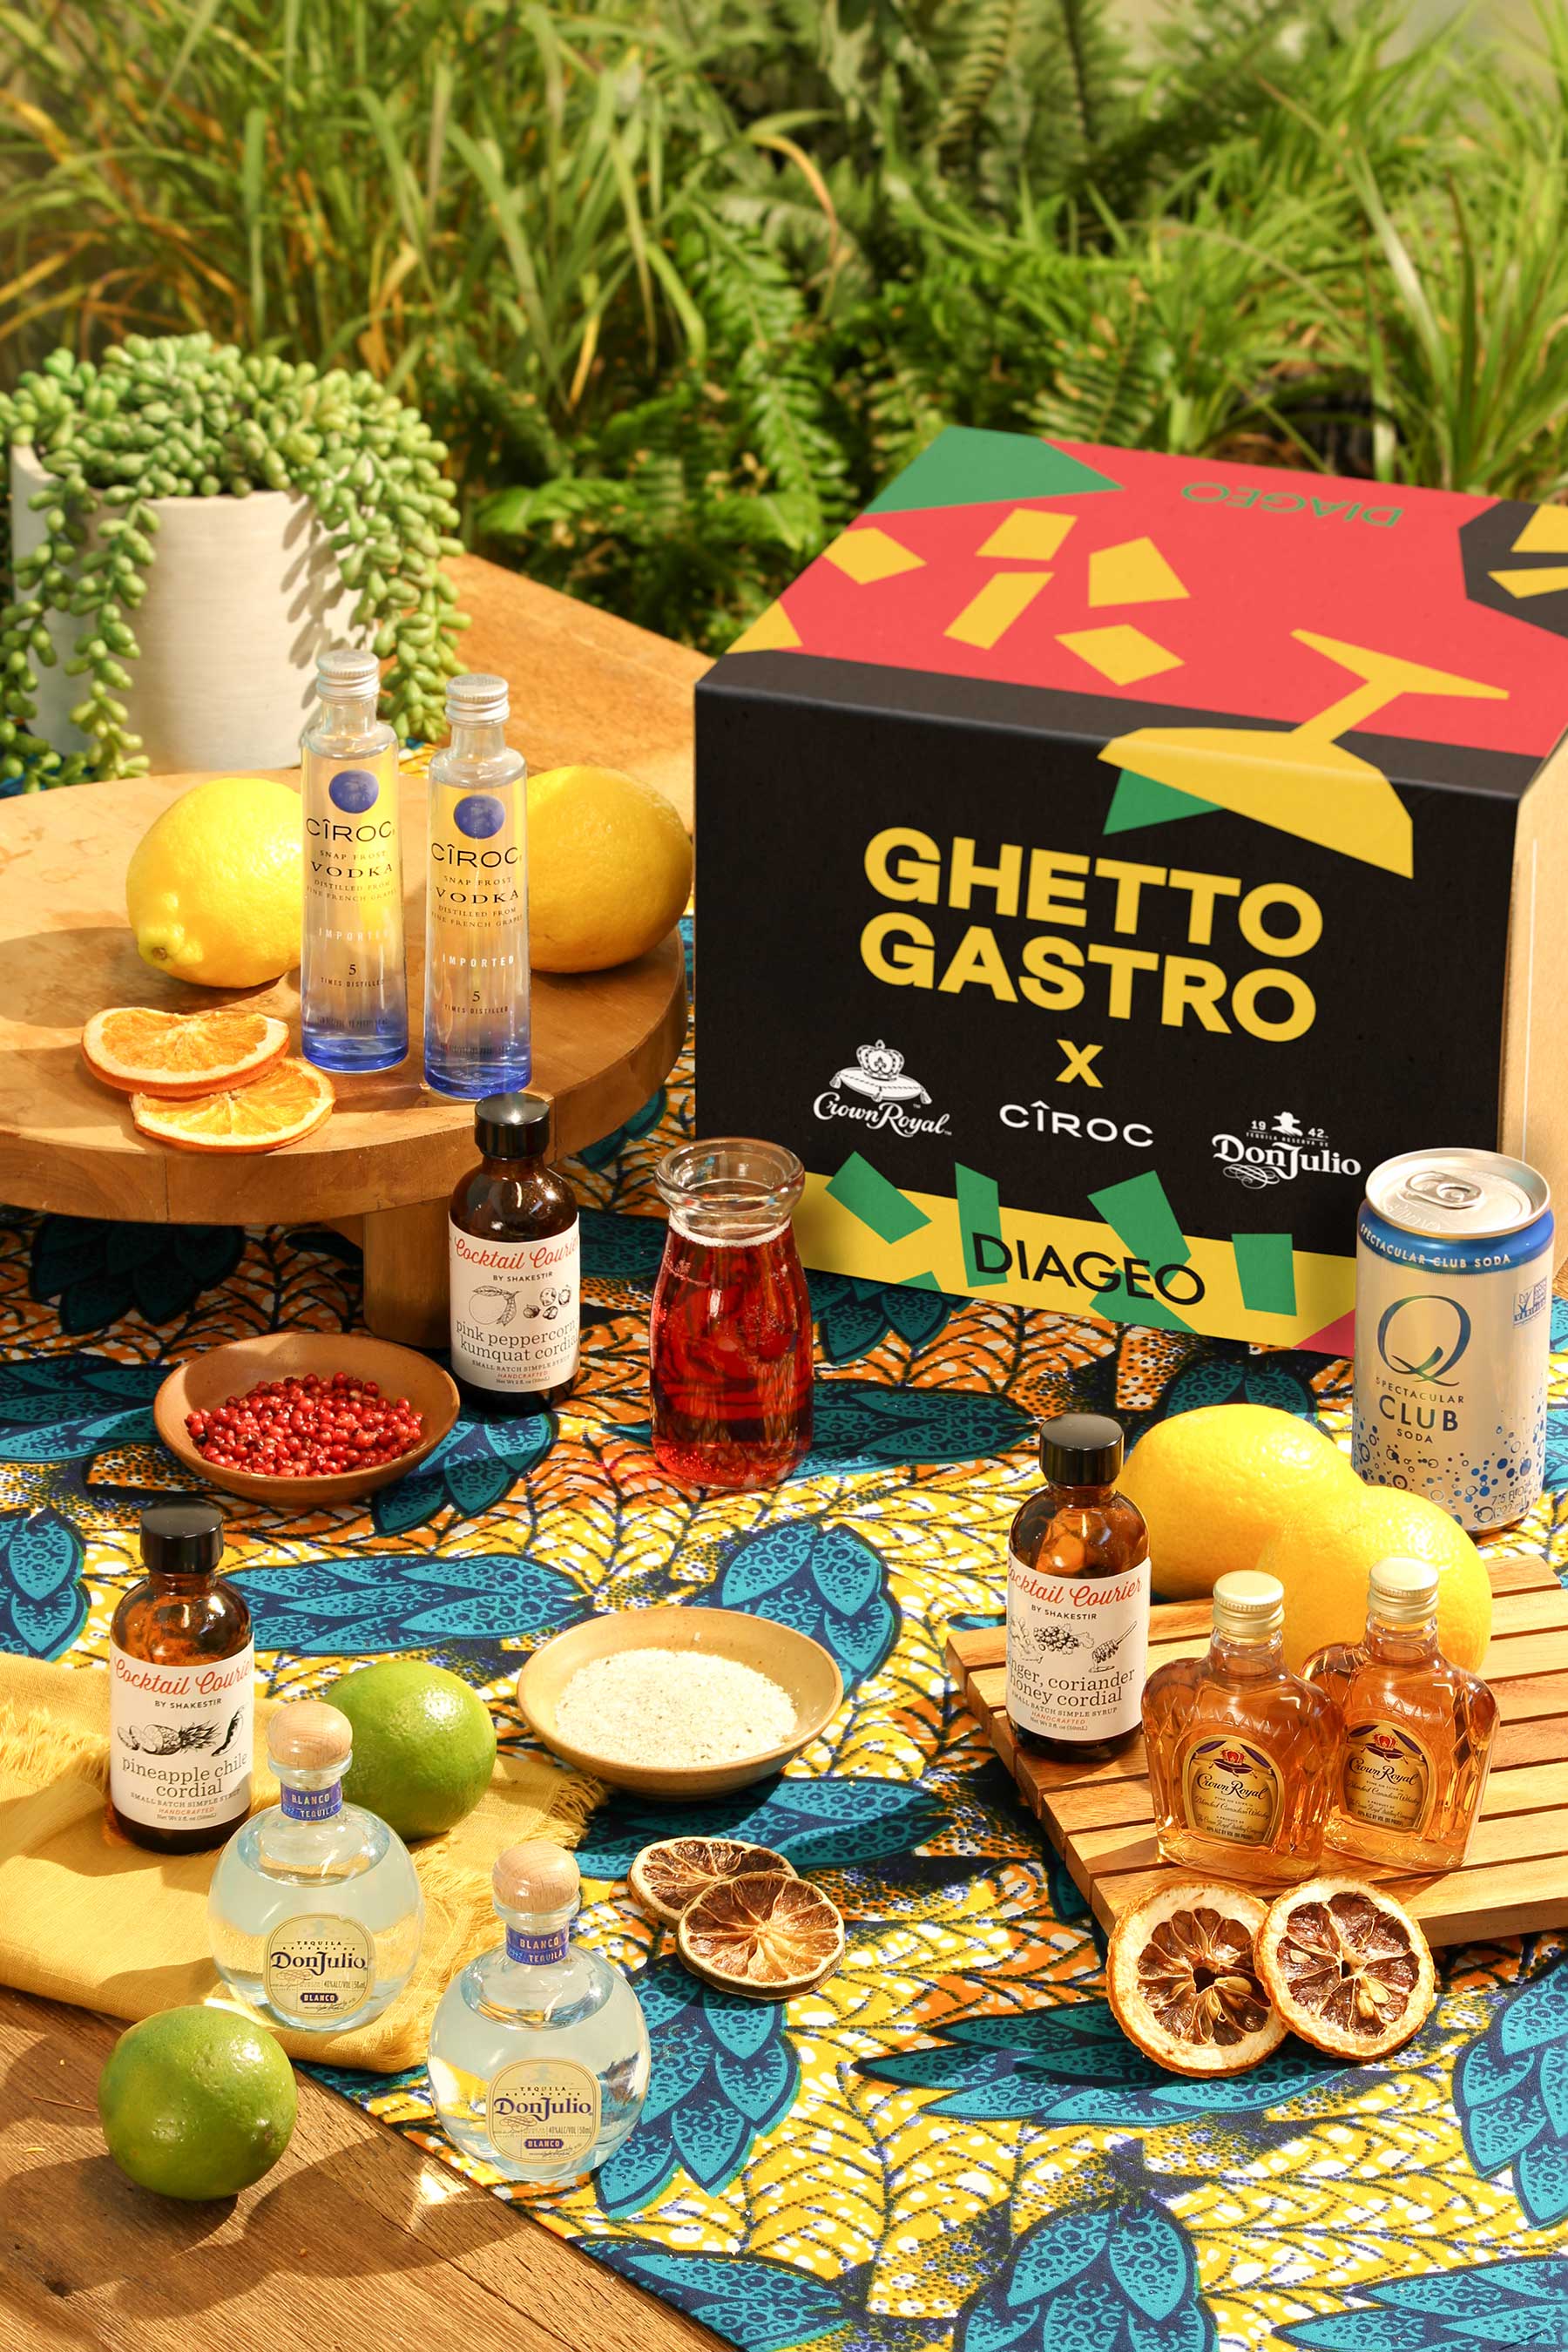 DIAGEO Partners with Ghetto Gastro to Create a Cocktail Courier Kit Perfect for Juneteenth or Any Summer Kickback